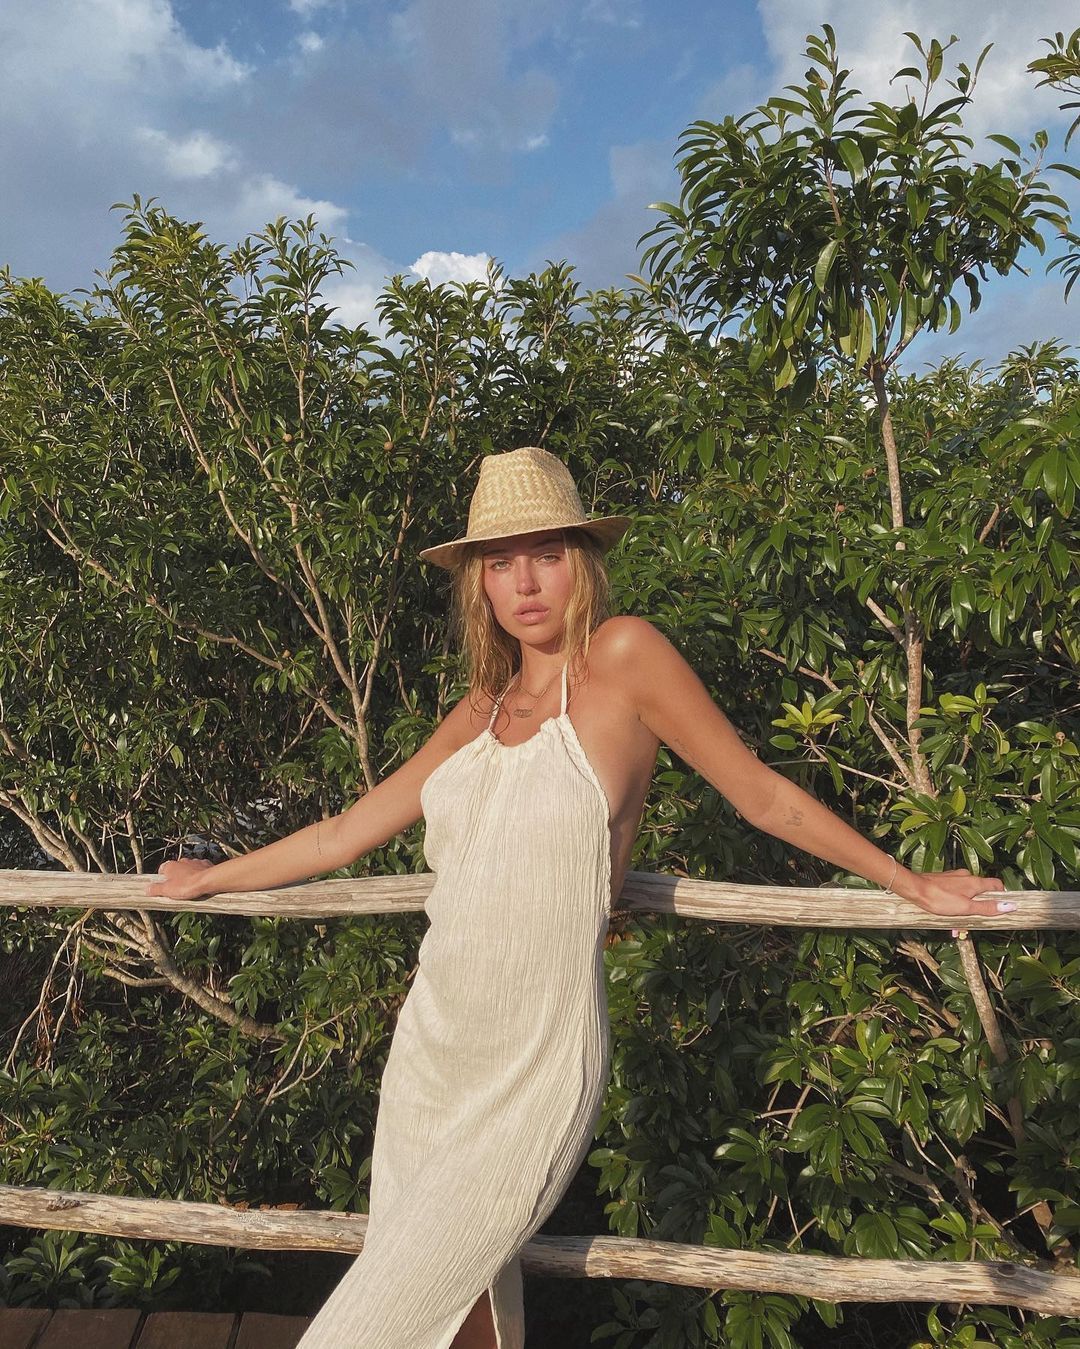 Delilah Hamlin wears a white dress and straw hat.